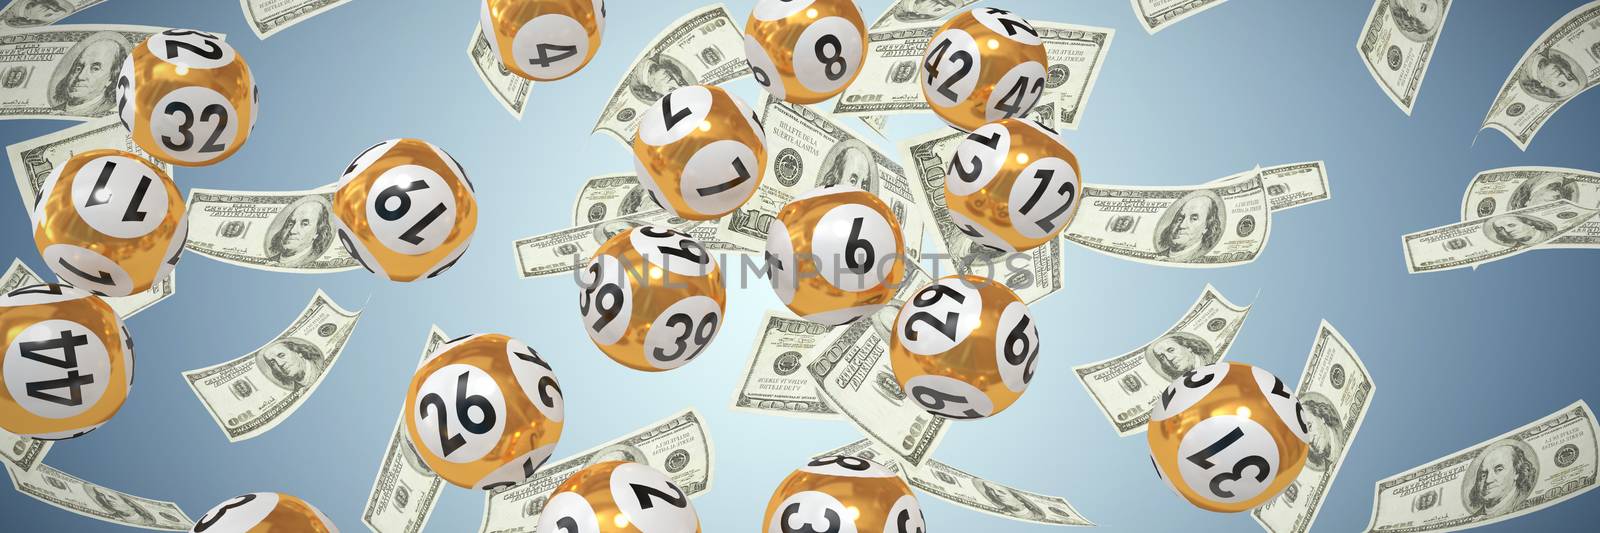 Lottery balls with nimbers against abstract blue background